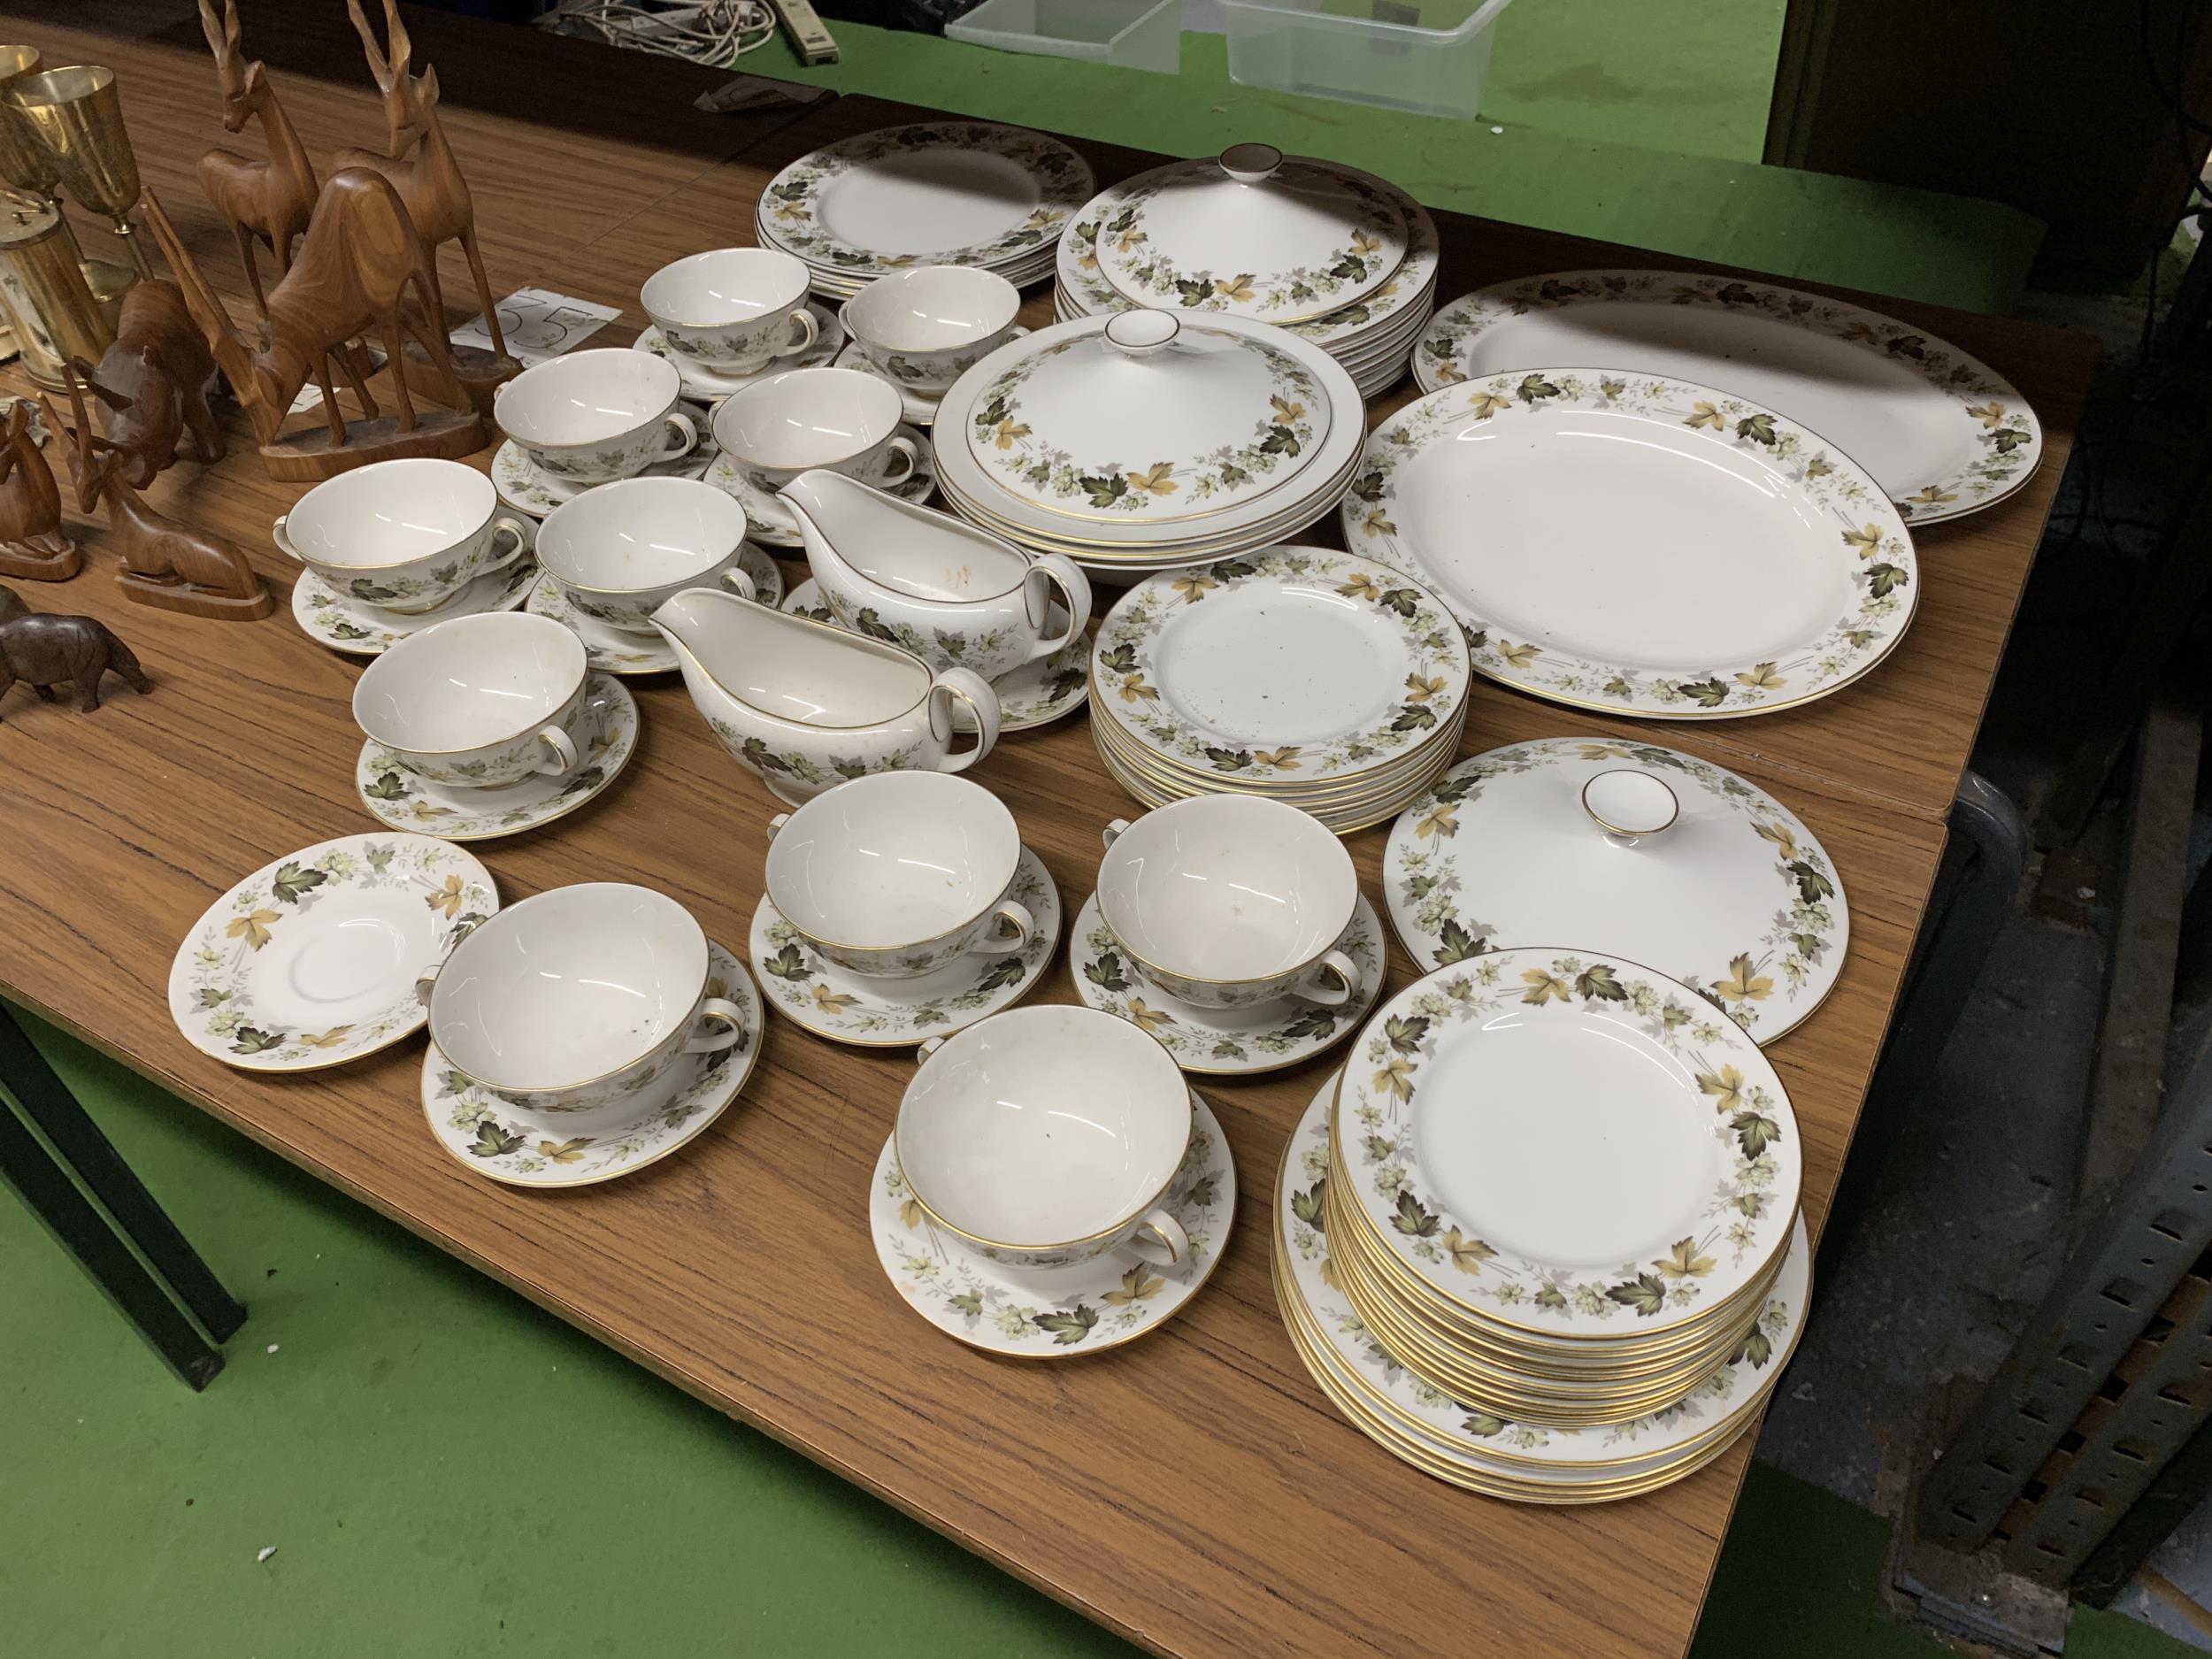 A ROYAL DOULTON 'LARCHMONT' PART DINNER SERVICE TO INCLUDE VARIOUS SIZES OF PLATES, SERVING BOWLS, - Image 3 of 4